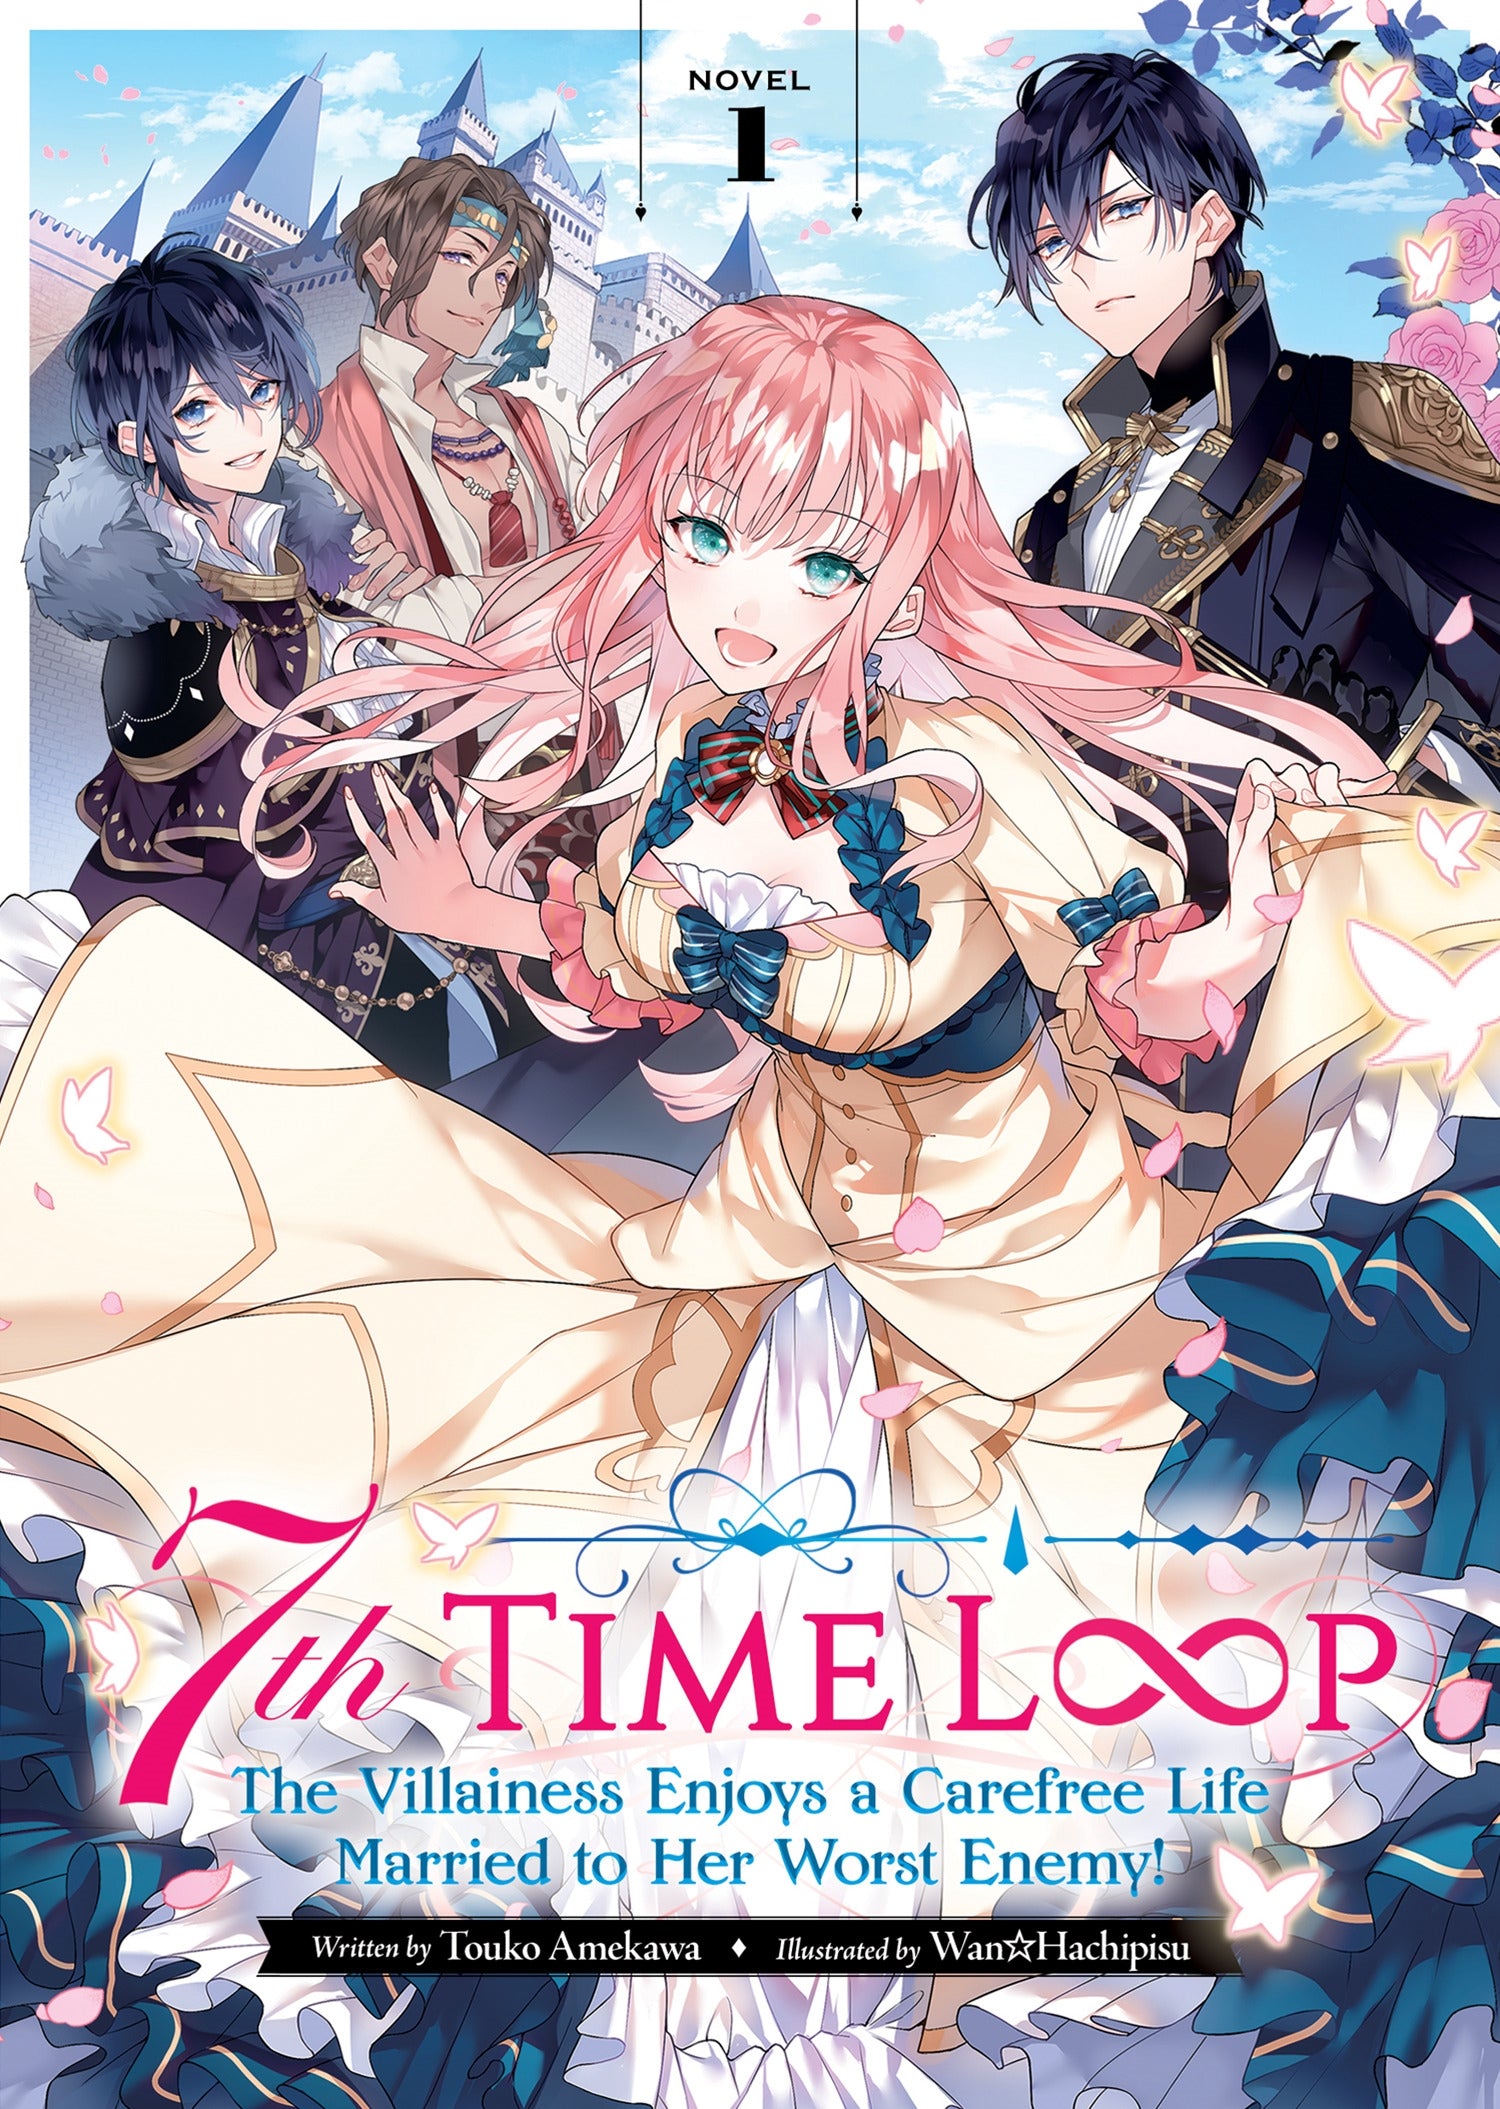 7th Time Loop The Villainess Enjoys a Carefree Life Married to Her Worst Enemy! (Light Novel) Vol. 1